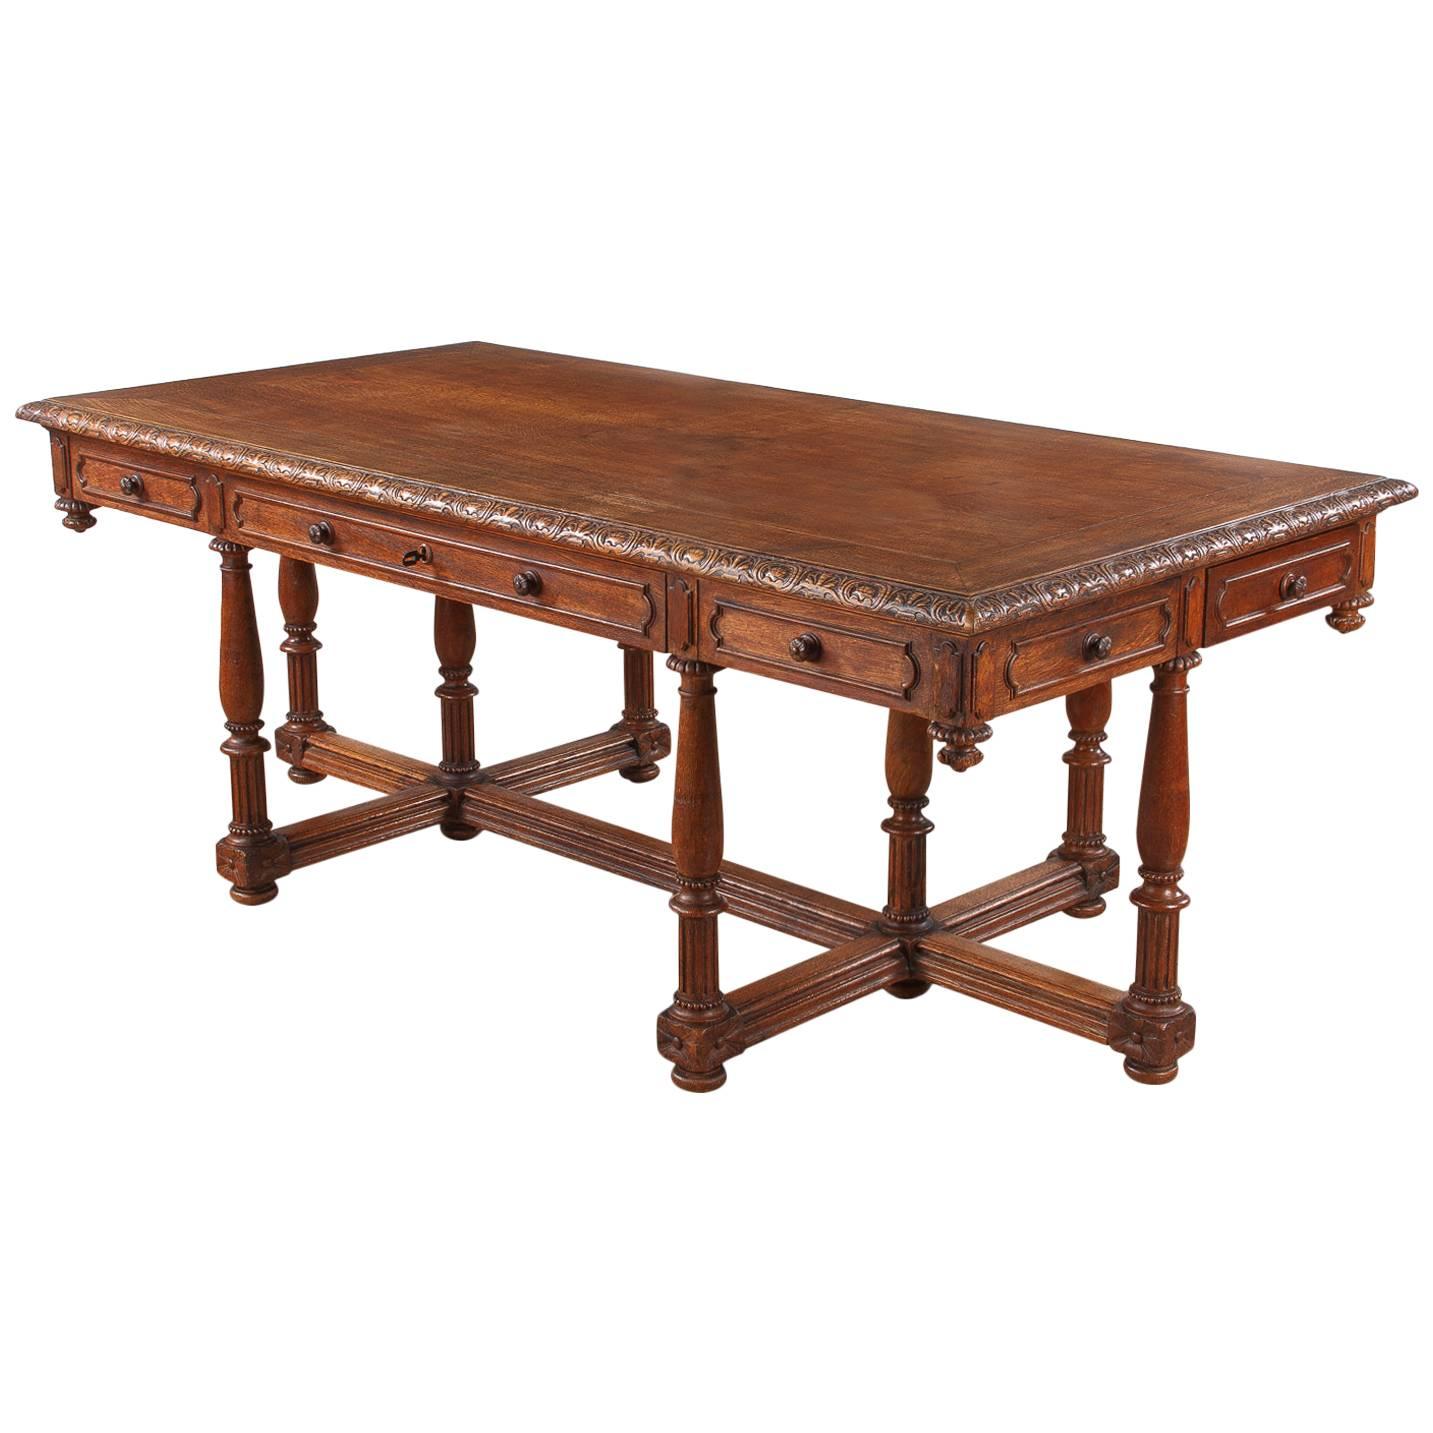 French Renaissance Revival Style Oak Library Table or Desk, Late 1800s